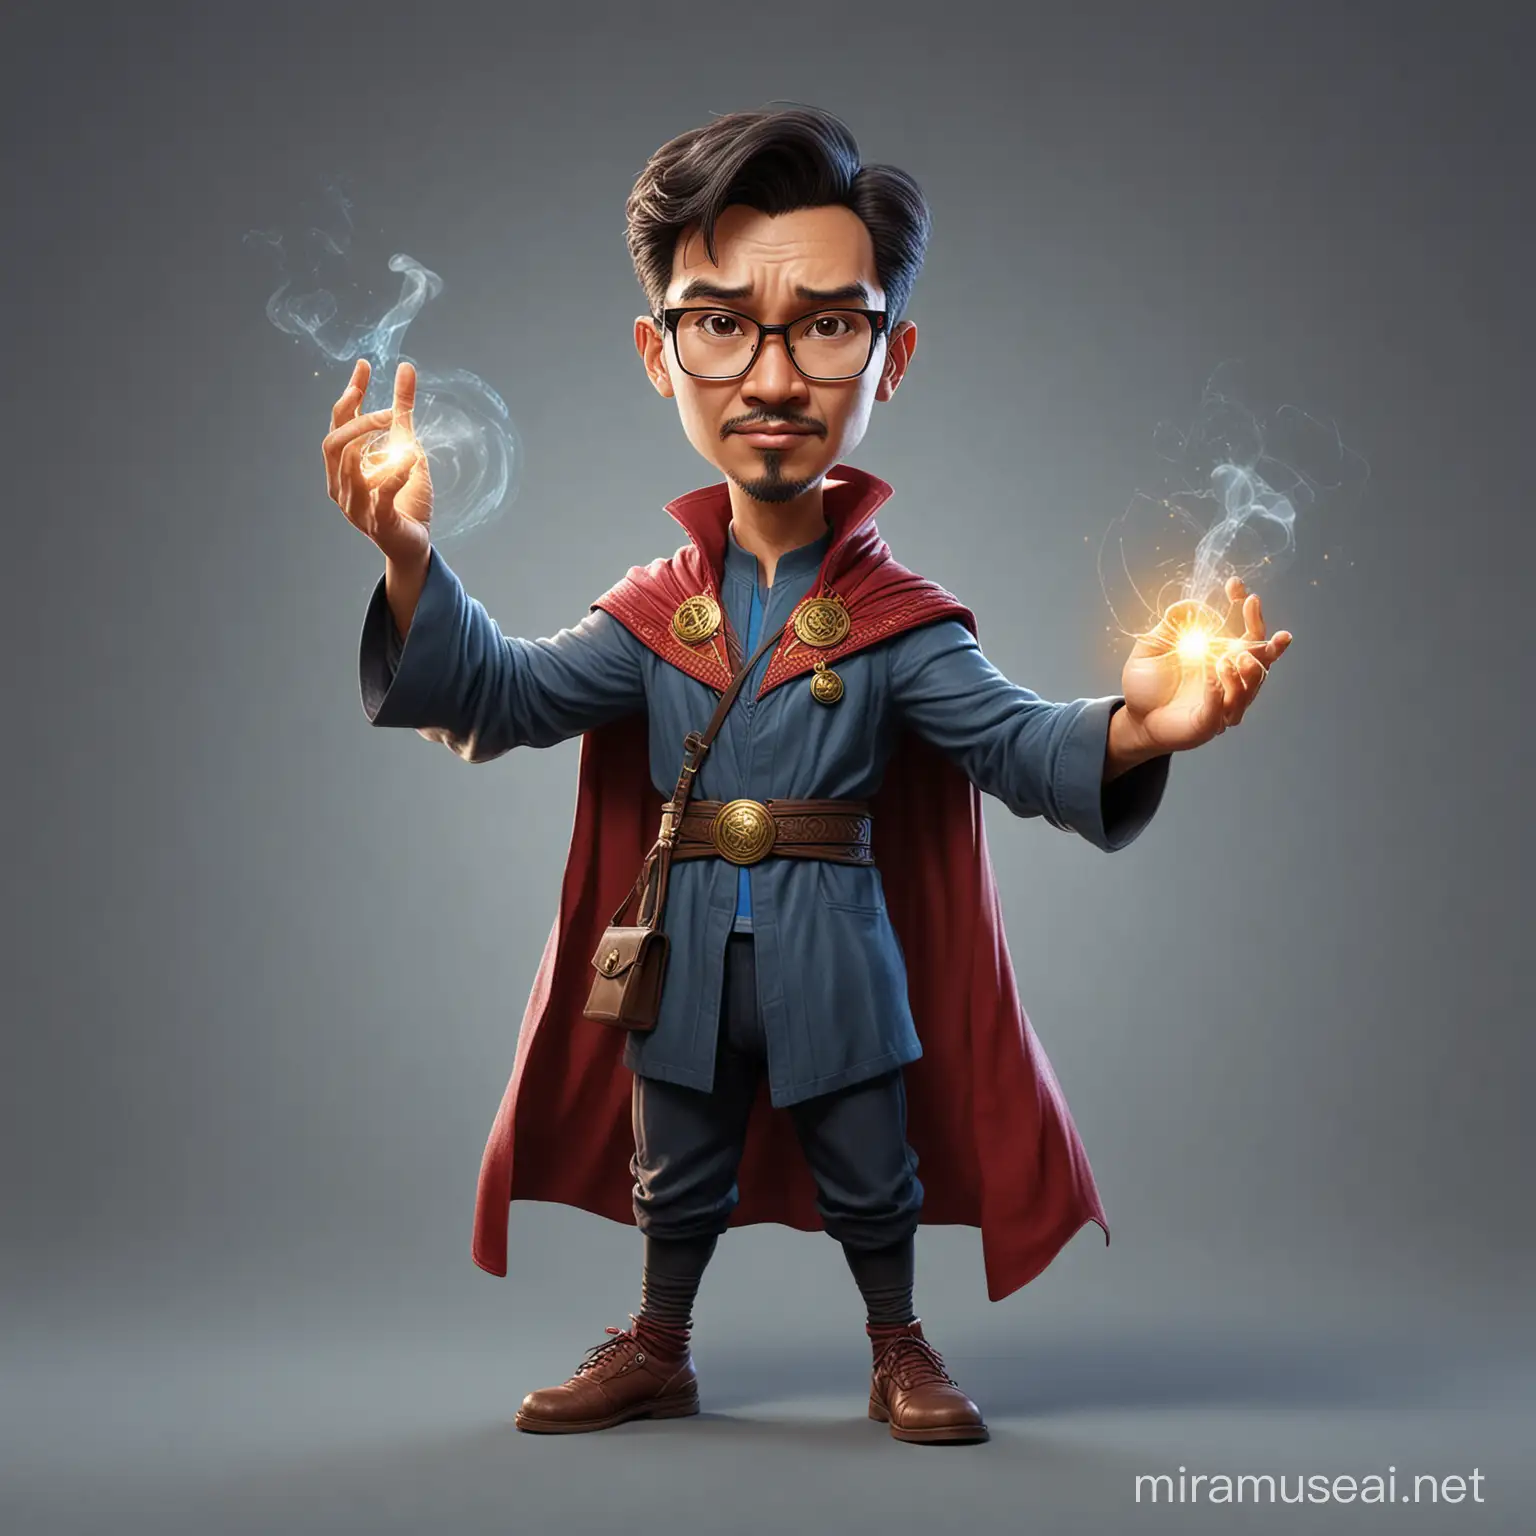 Whimsical Full Body Caricature Portrait of a 29YearOld Indonesian Man in Doctor Strange Costume Casting Magical Spell